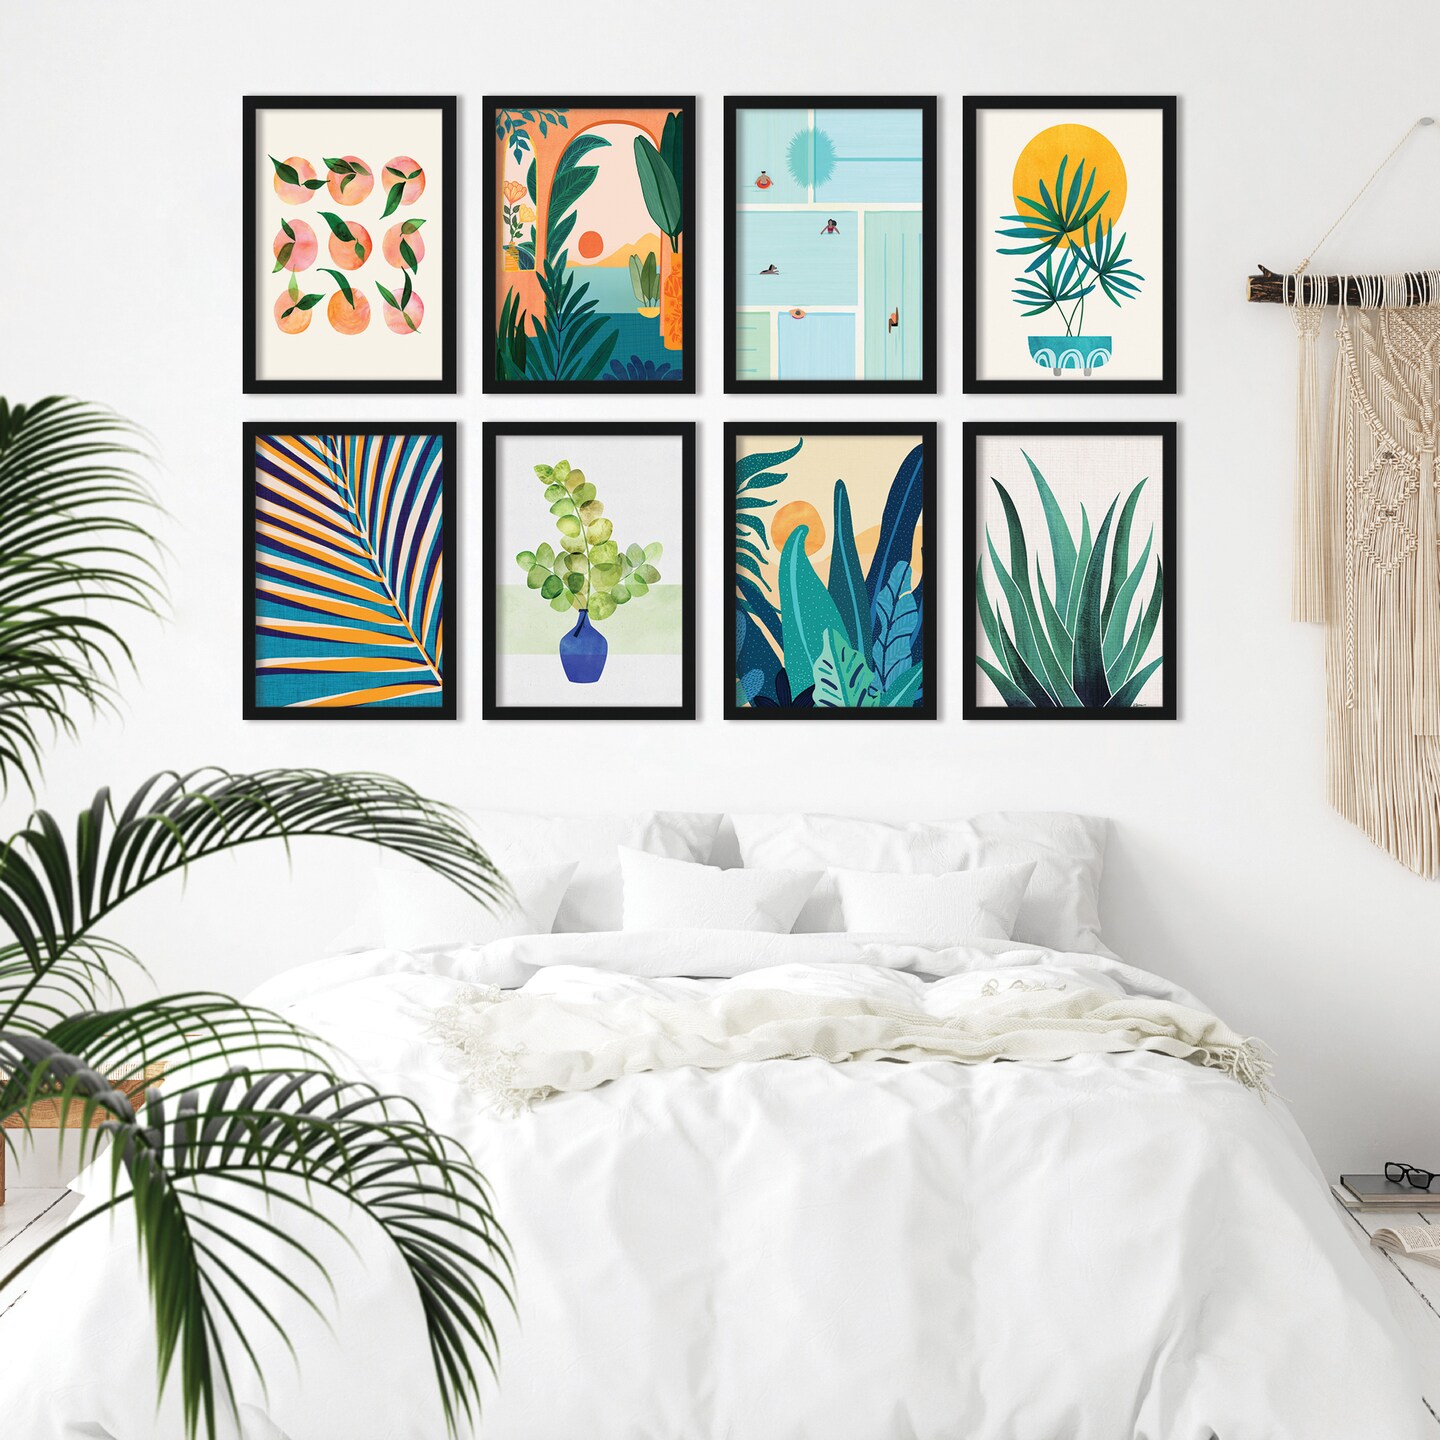 Tropical Palms In Paradise by Modern Tropical - 8 Piece Framed Art Set